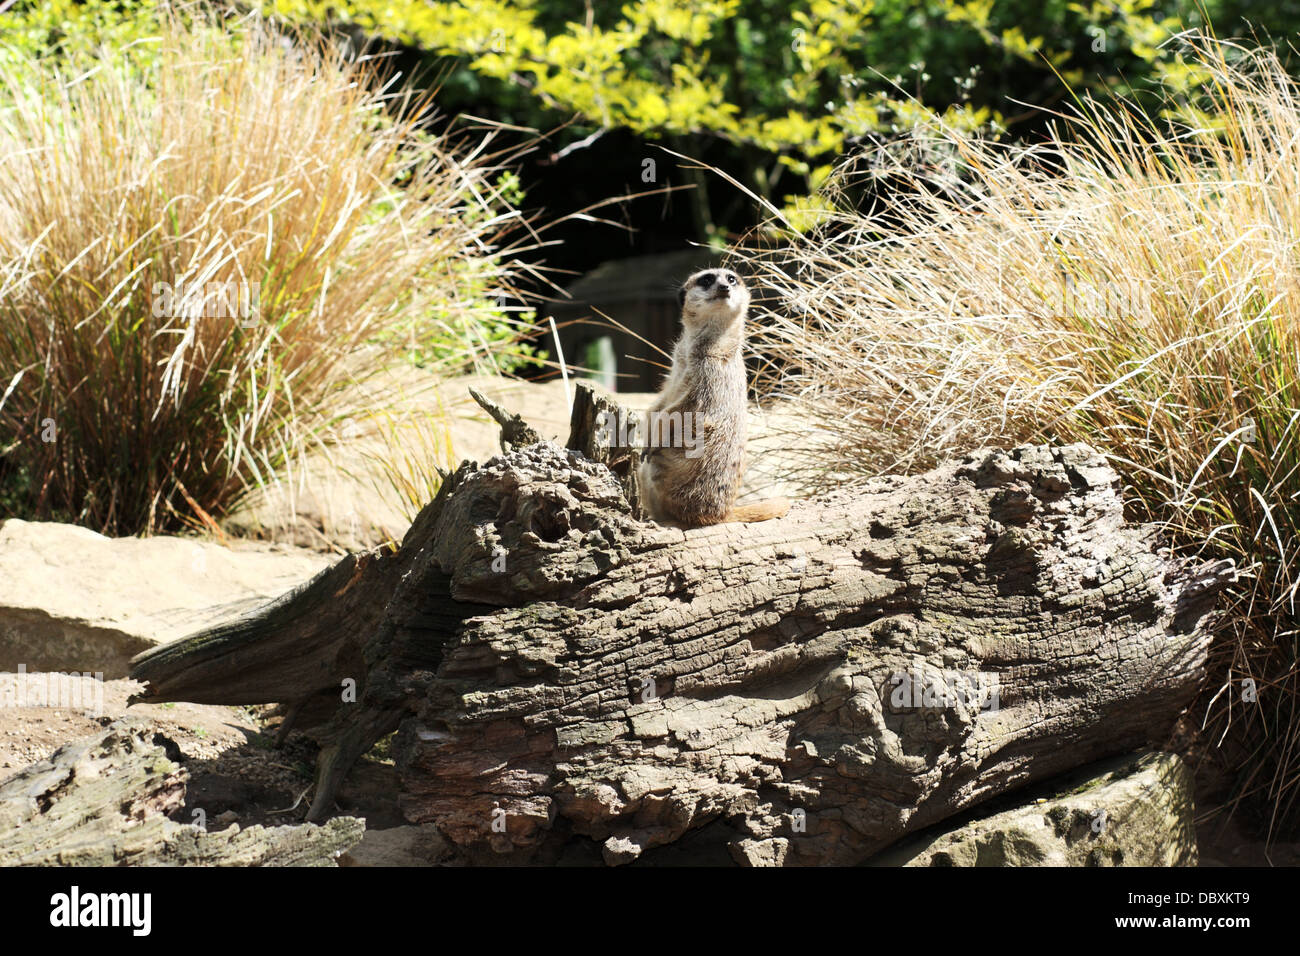 meerkat watching from a log Stock Photo